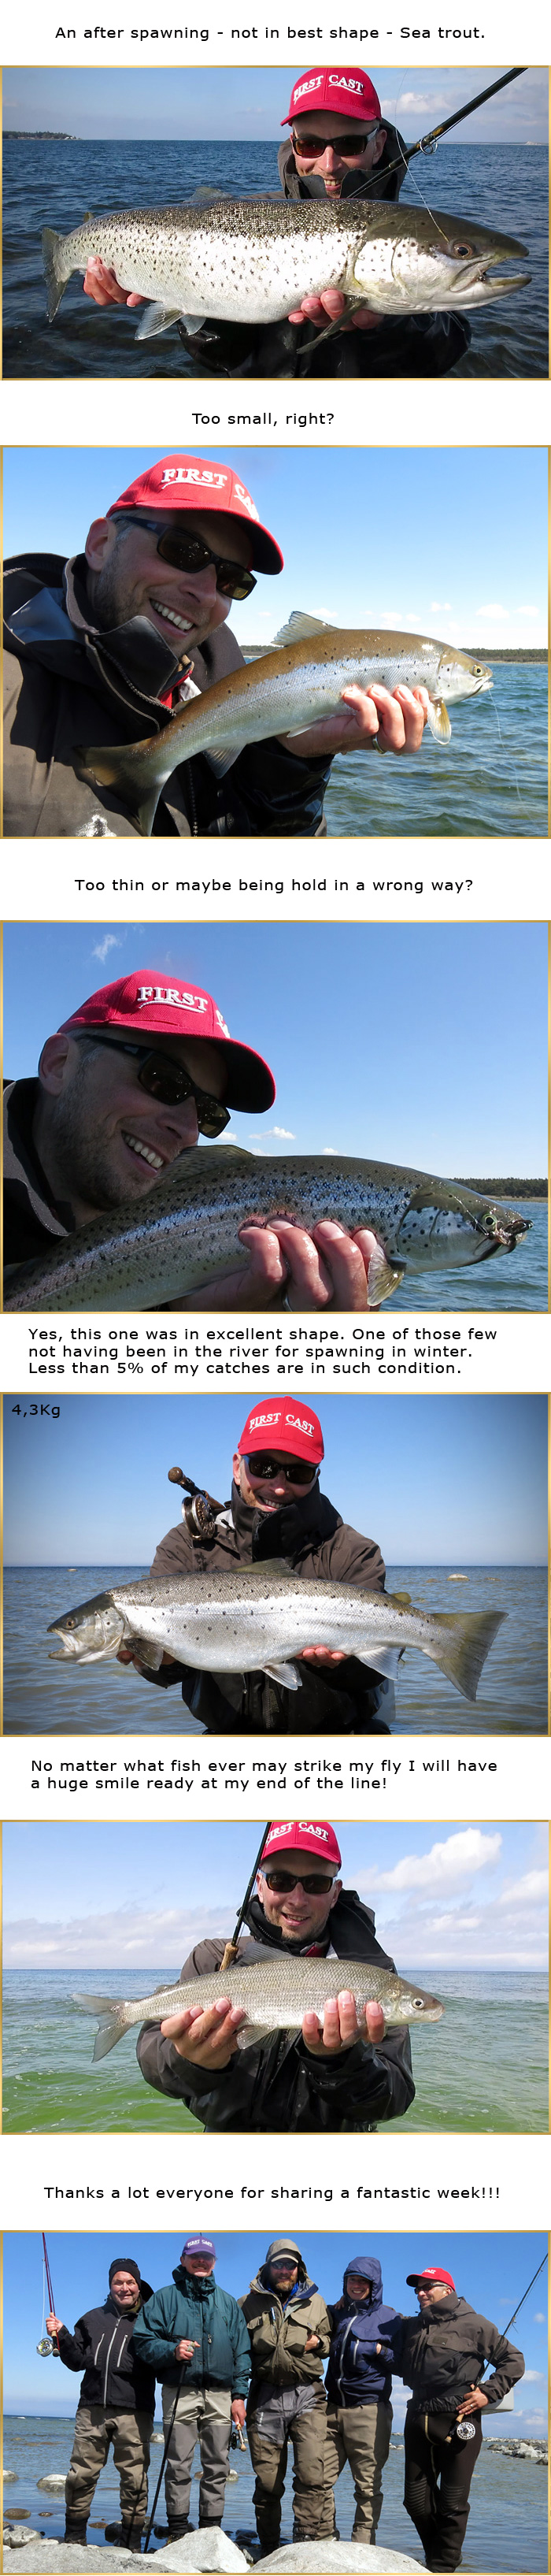 fly fishing seatrout